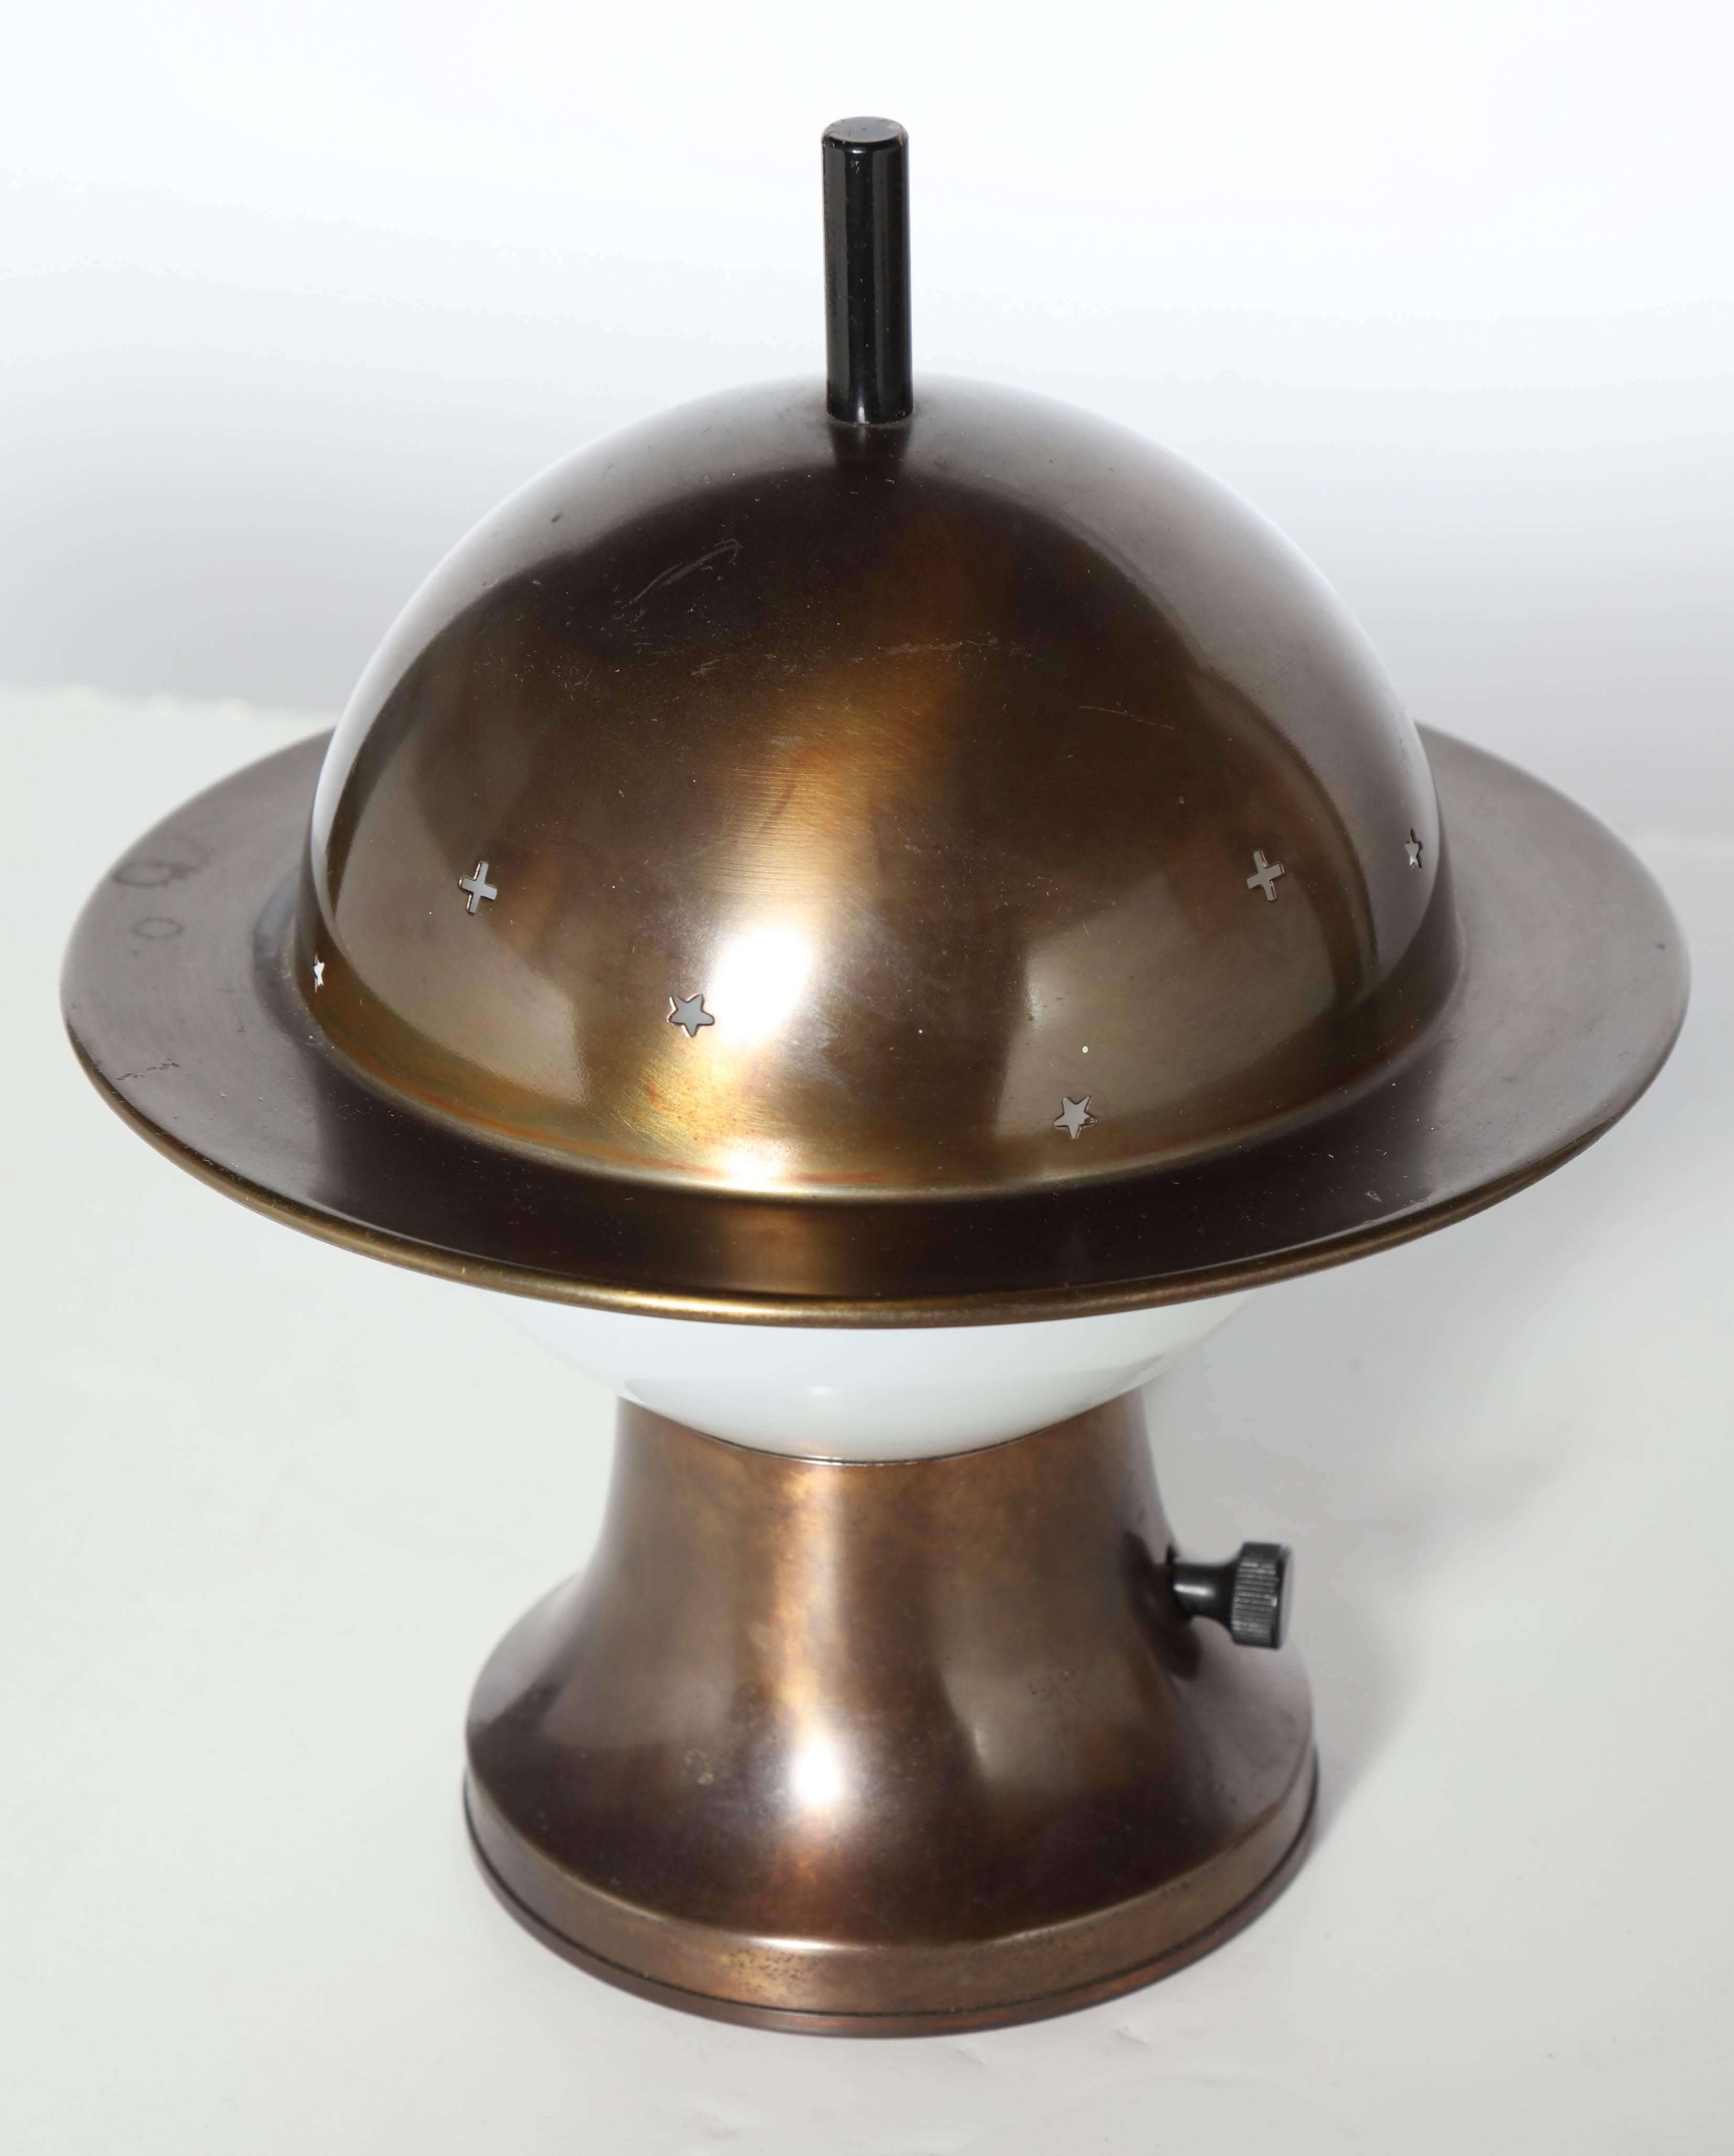 Circa 1935 Walter Von Nessen for Chase Brass and Copper Company Constellation Brass Table Lamp. English Bronze finish. Pierced Brass helmet Shade with constellations. Round Opaque White Milk glass shade. Flared Brass base. Saturn. Heavenly.